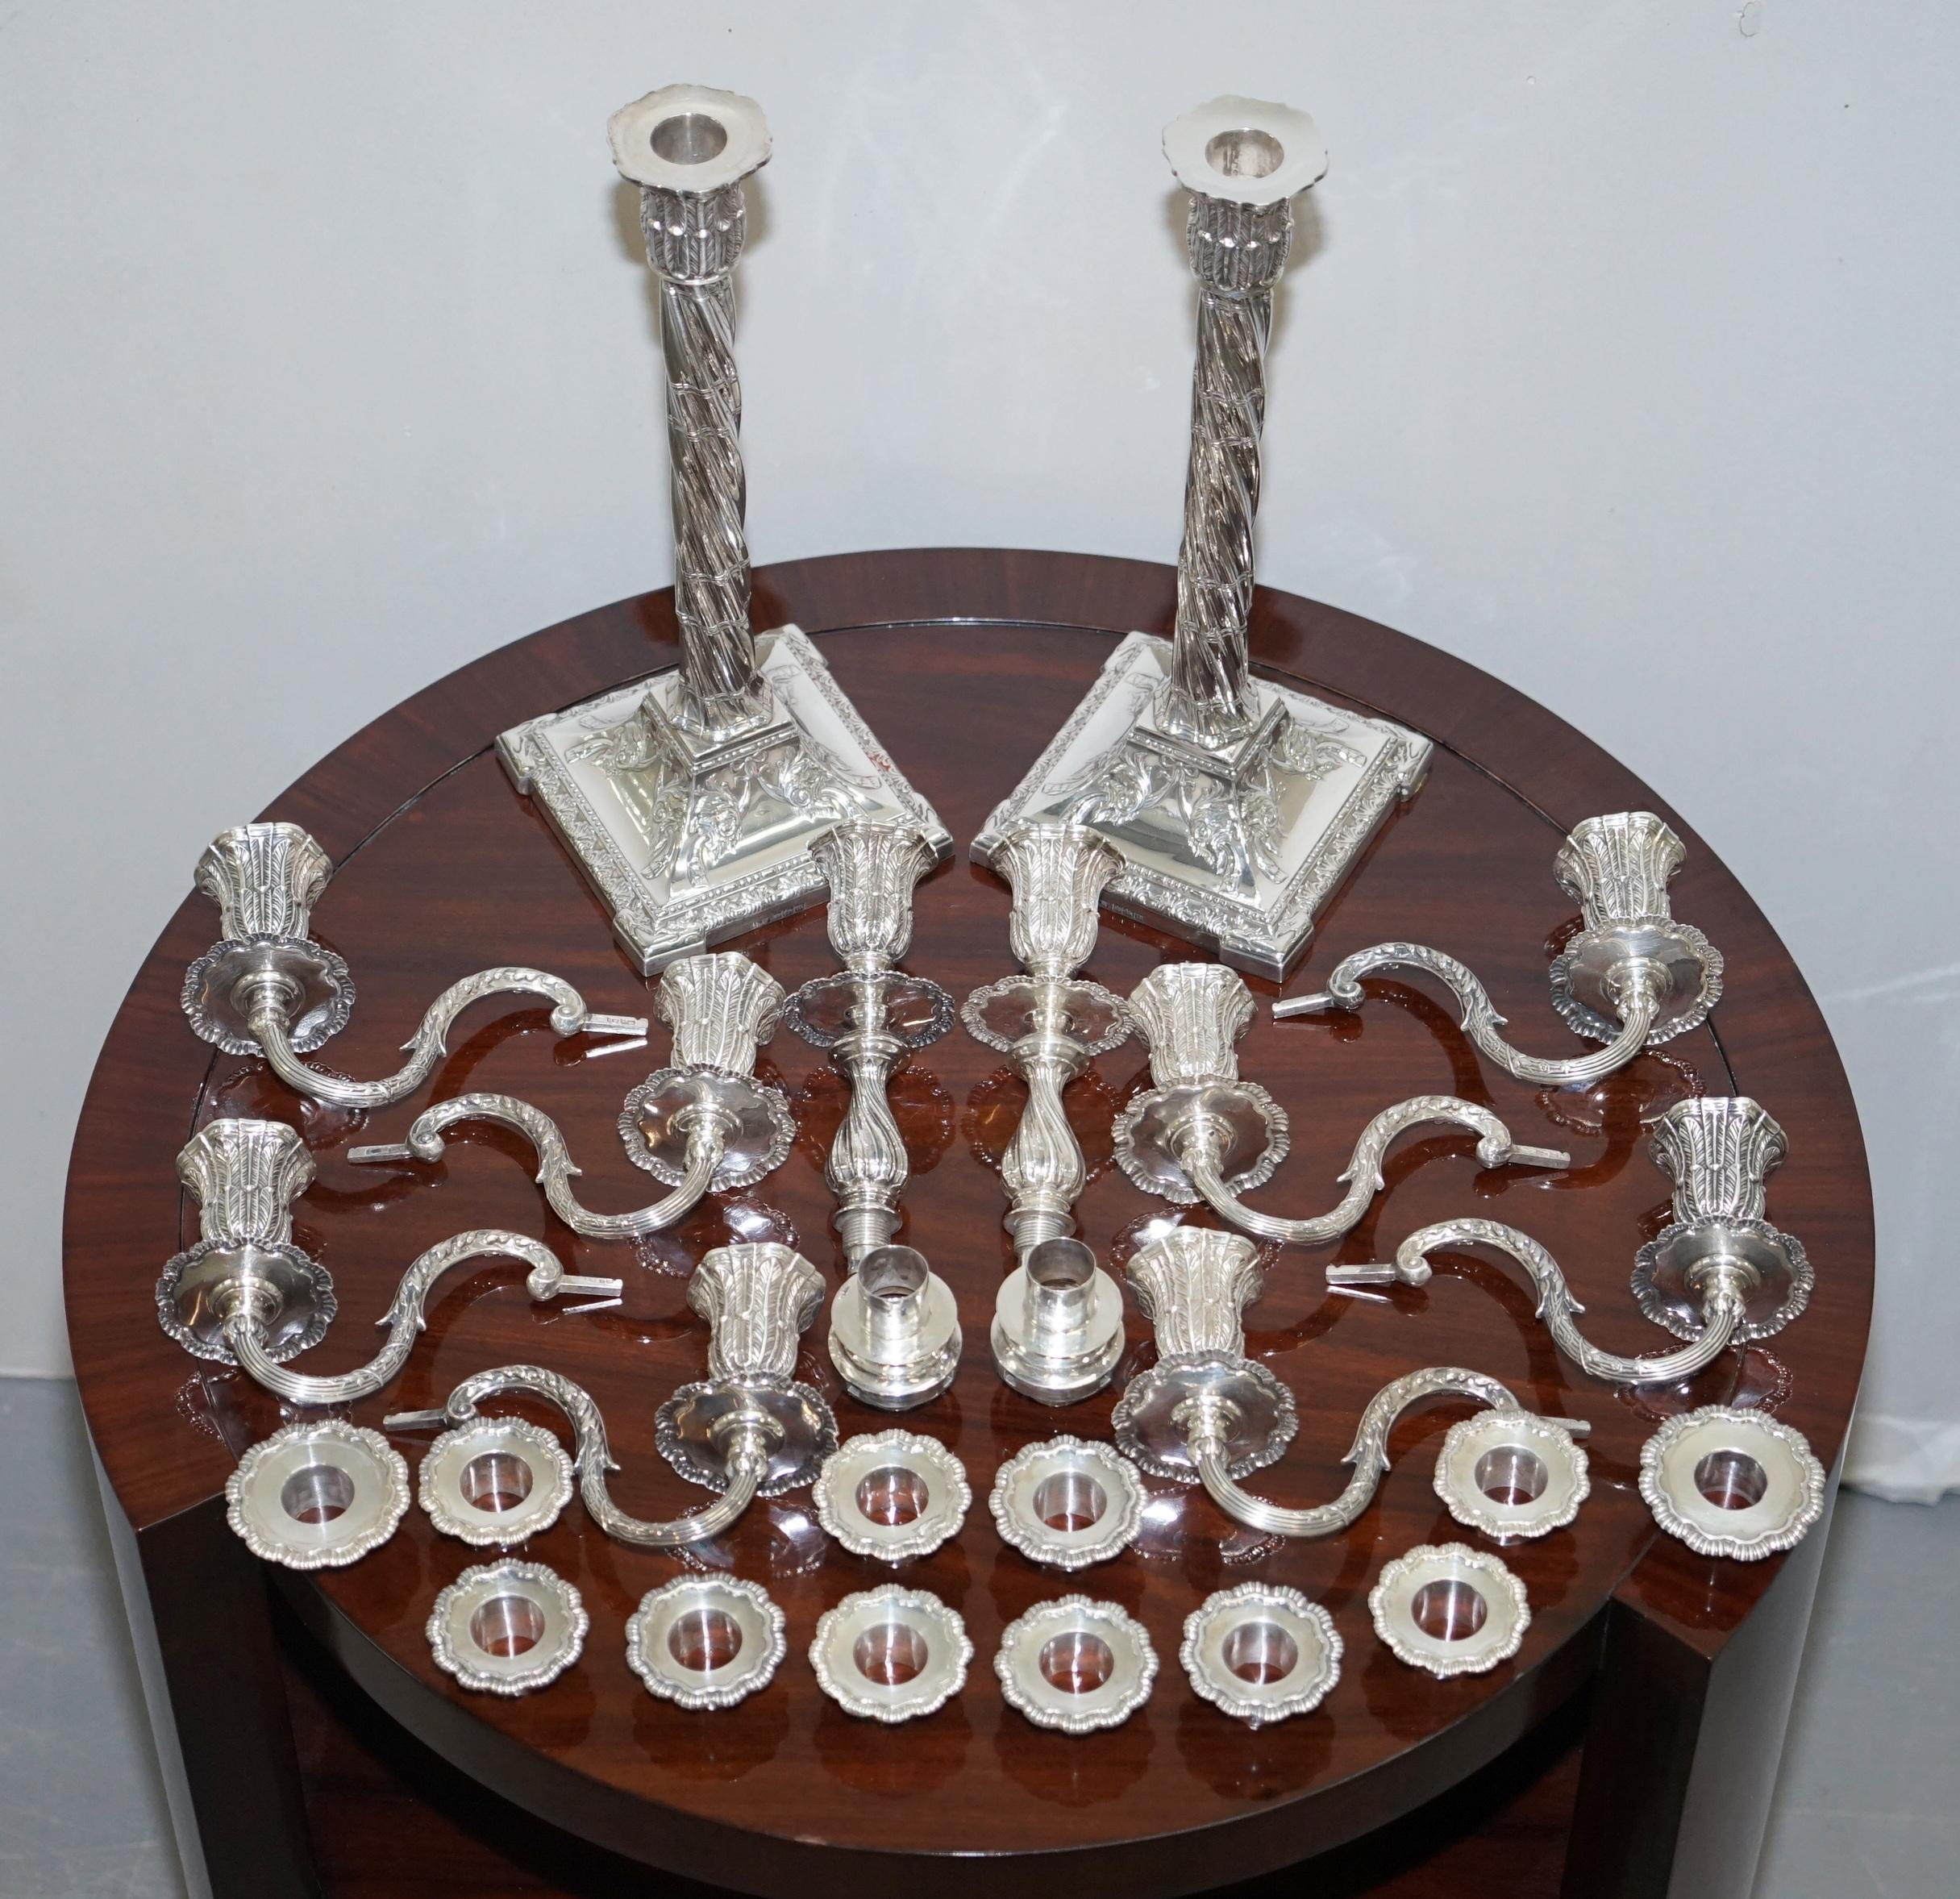 We are delighted to offer for sale this sublime pair of very decorative and important original Henry Wigfull 1904 solid sterling silver Candelabra

These are a very well made pair of Edward VII Sterling Silver five-light Candelabra, by Henry